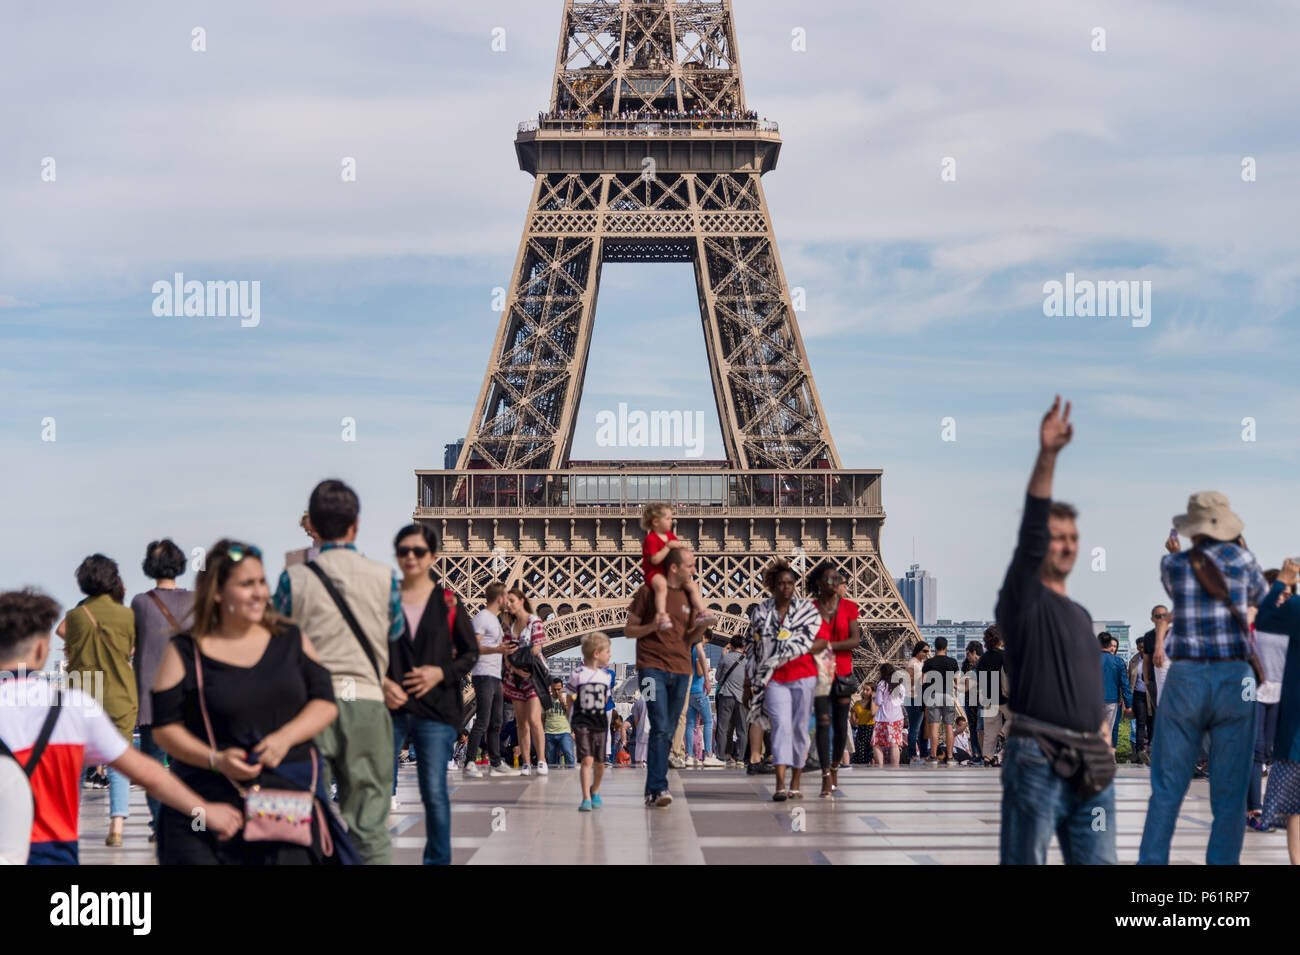 Paris, France - 23 June 2018: Eiffel Tower from Trocadero with many tourists in the foreground Stock Photo